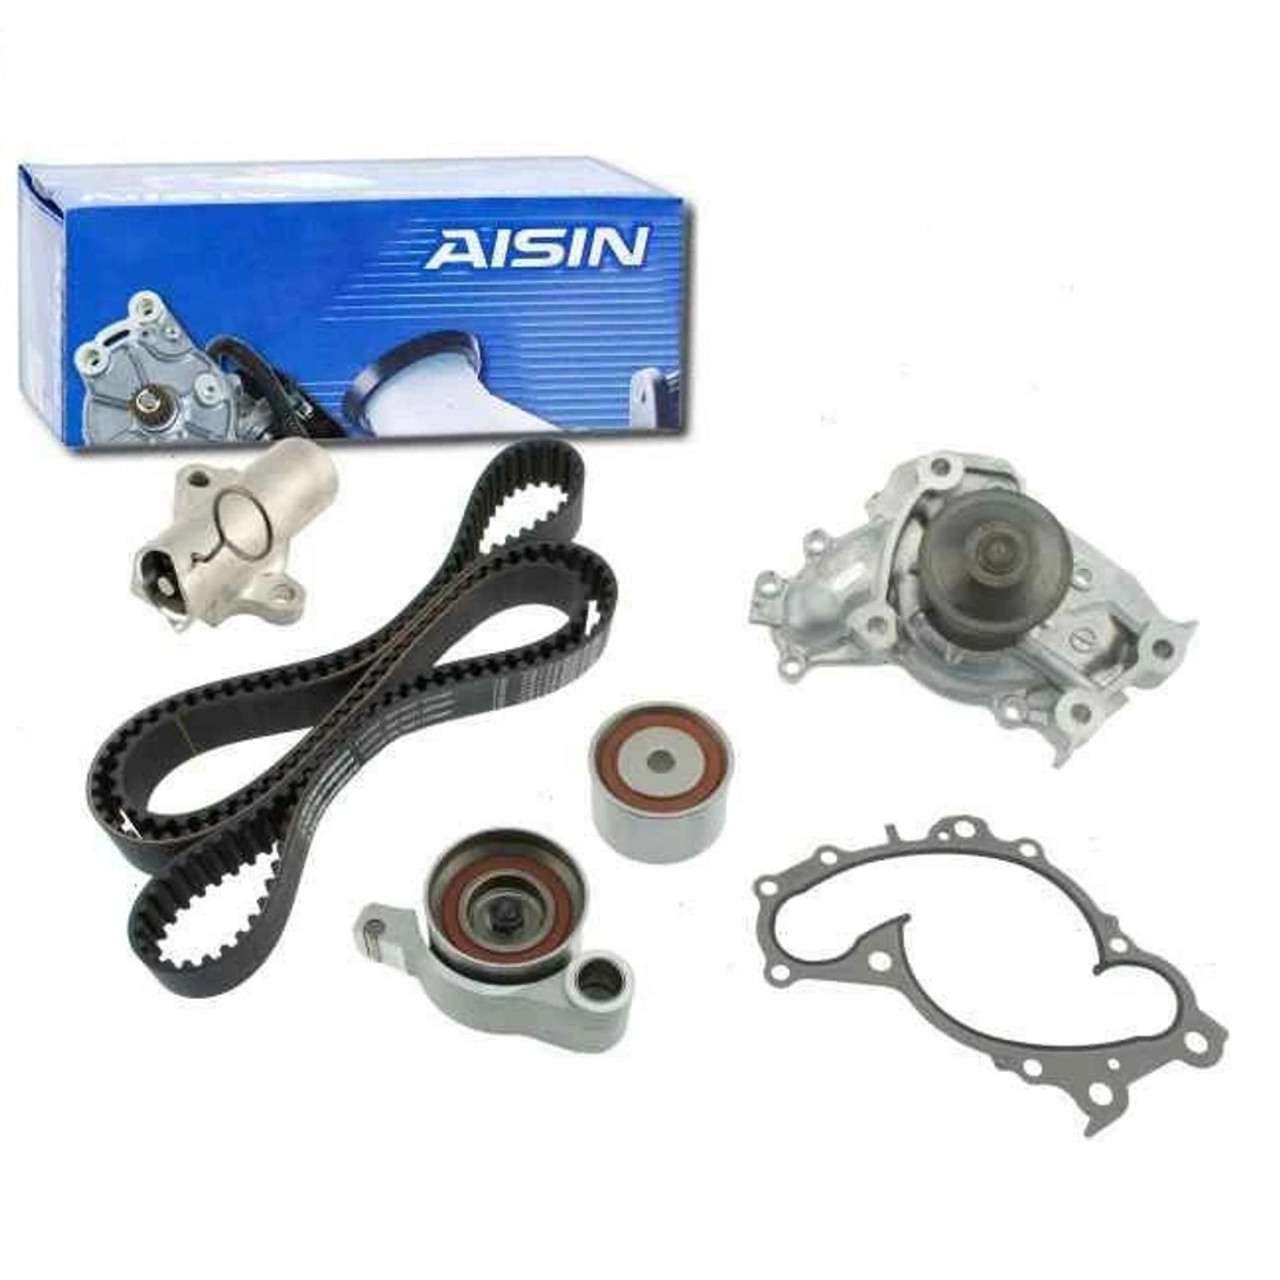 Timing Kit- Toyota 1MZFE  3.3L 3MZFE Aisin Engine Timing Belt Kit with Water  Pump